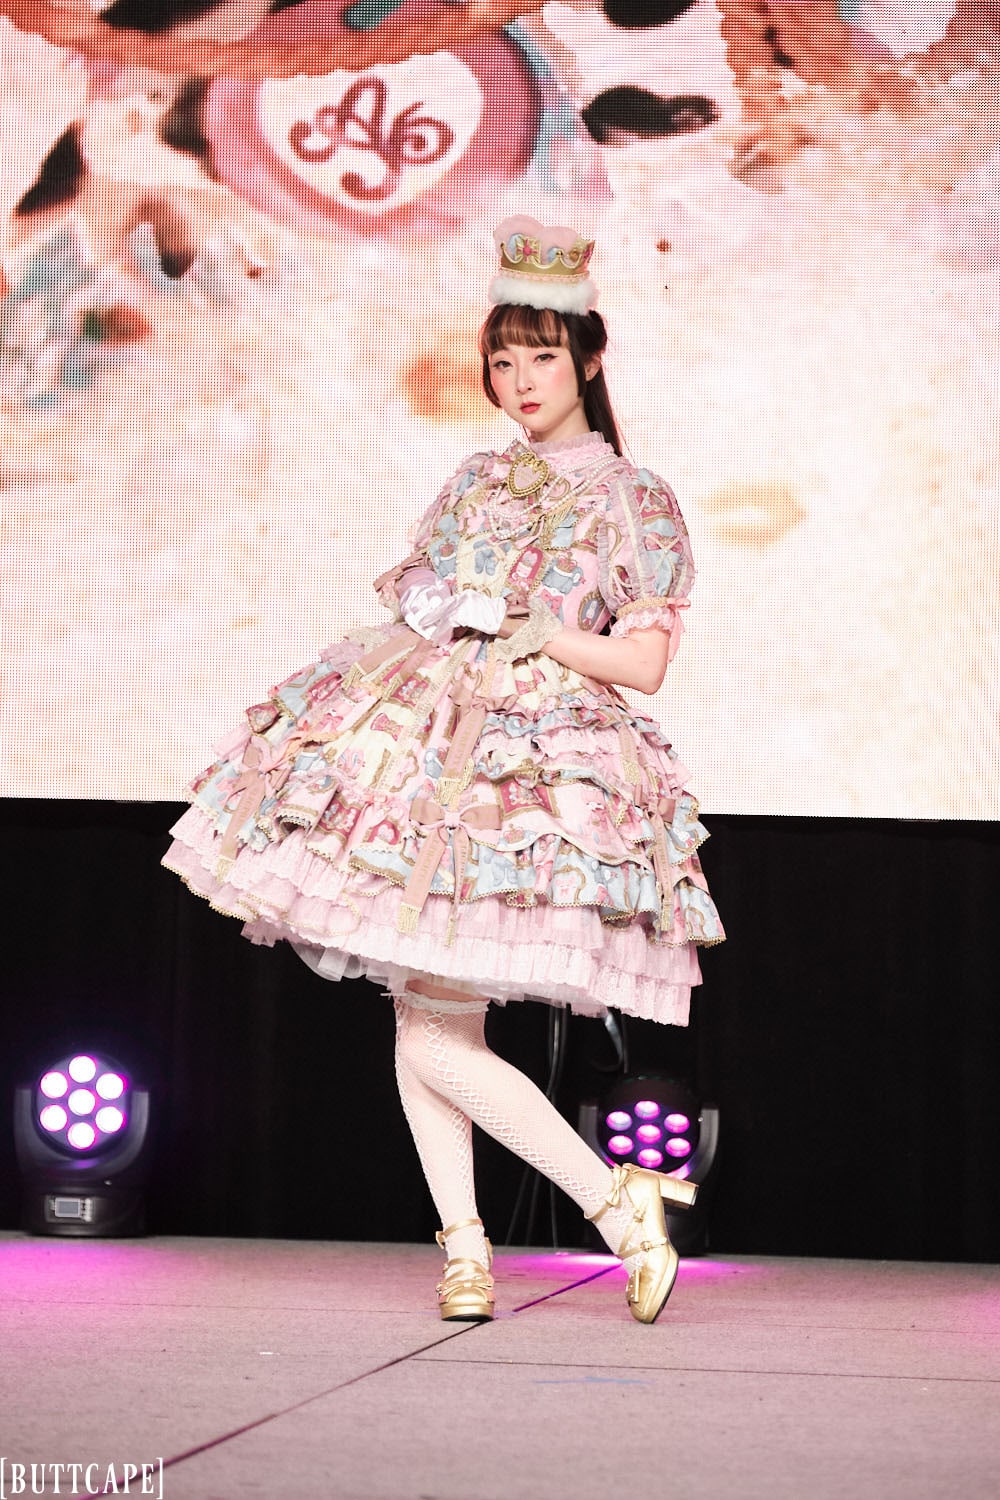 Lolita model Rin Rin Doll wearing over the top frilly Angelic Pretty dress - full body 1.